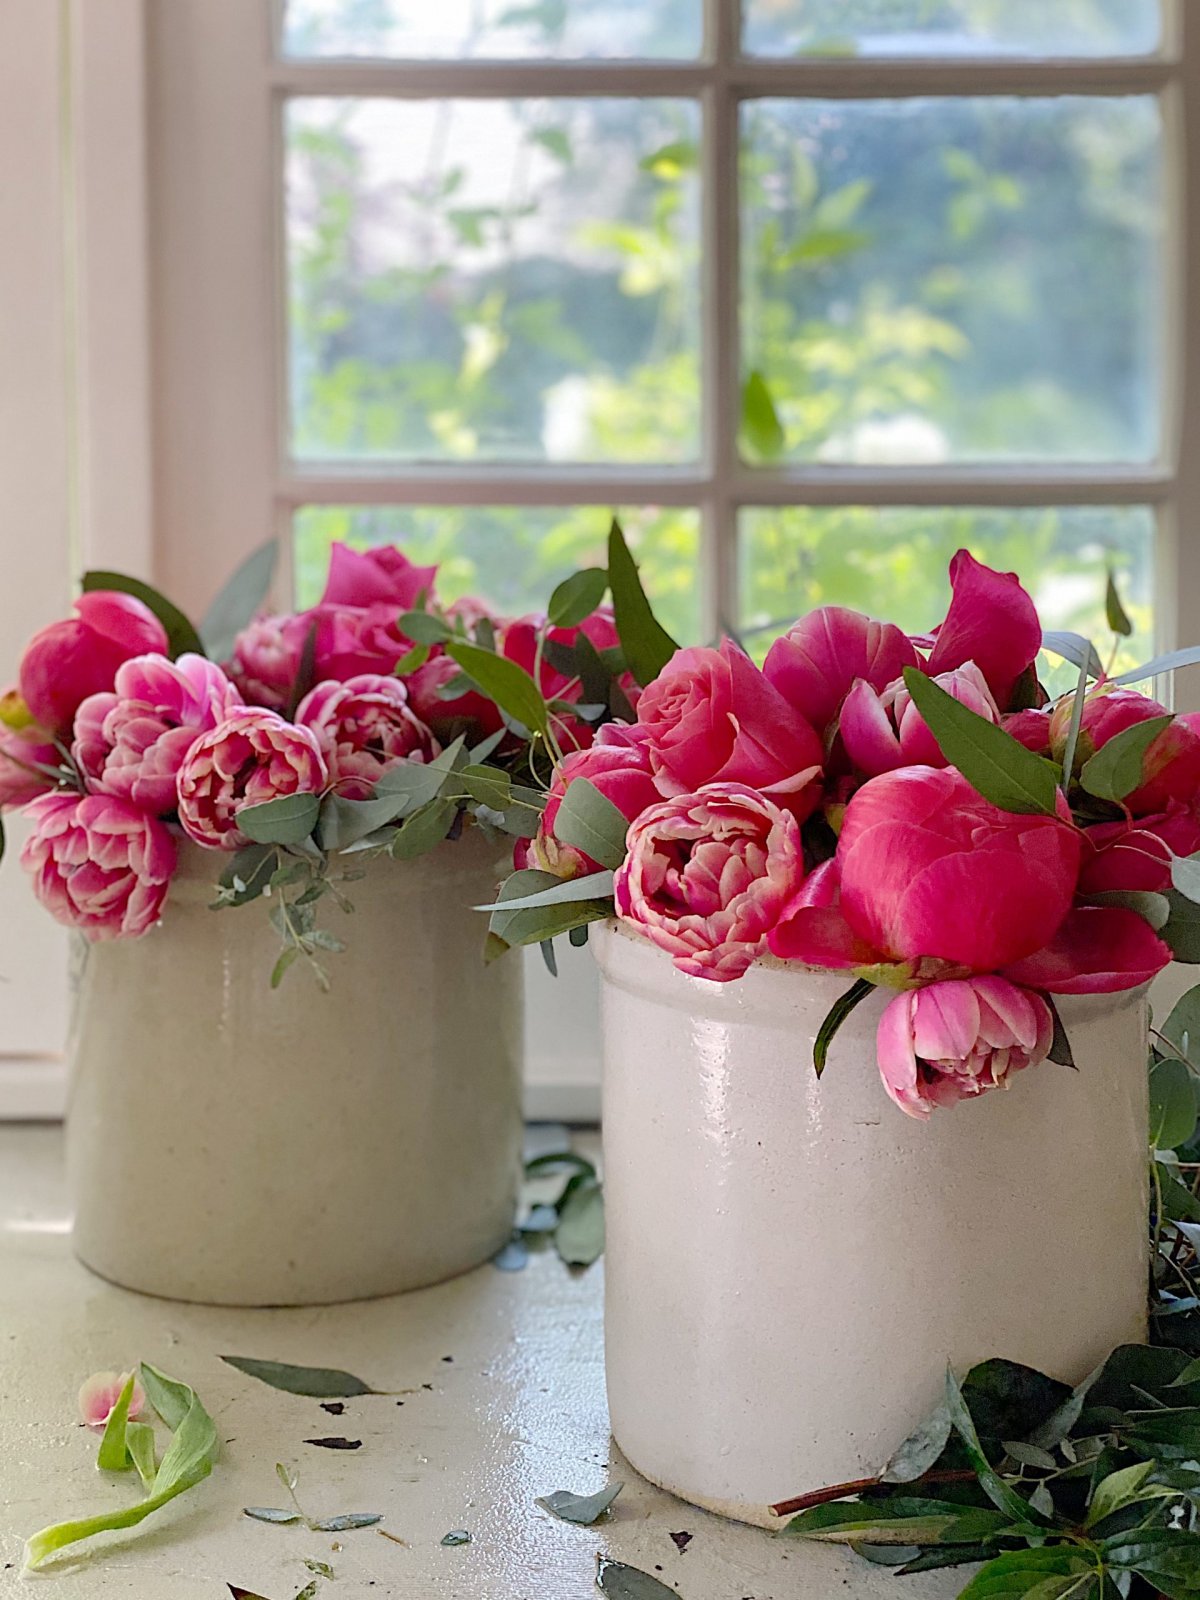 How to Decorate Flowers in a Vase or Crock